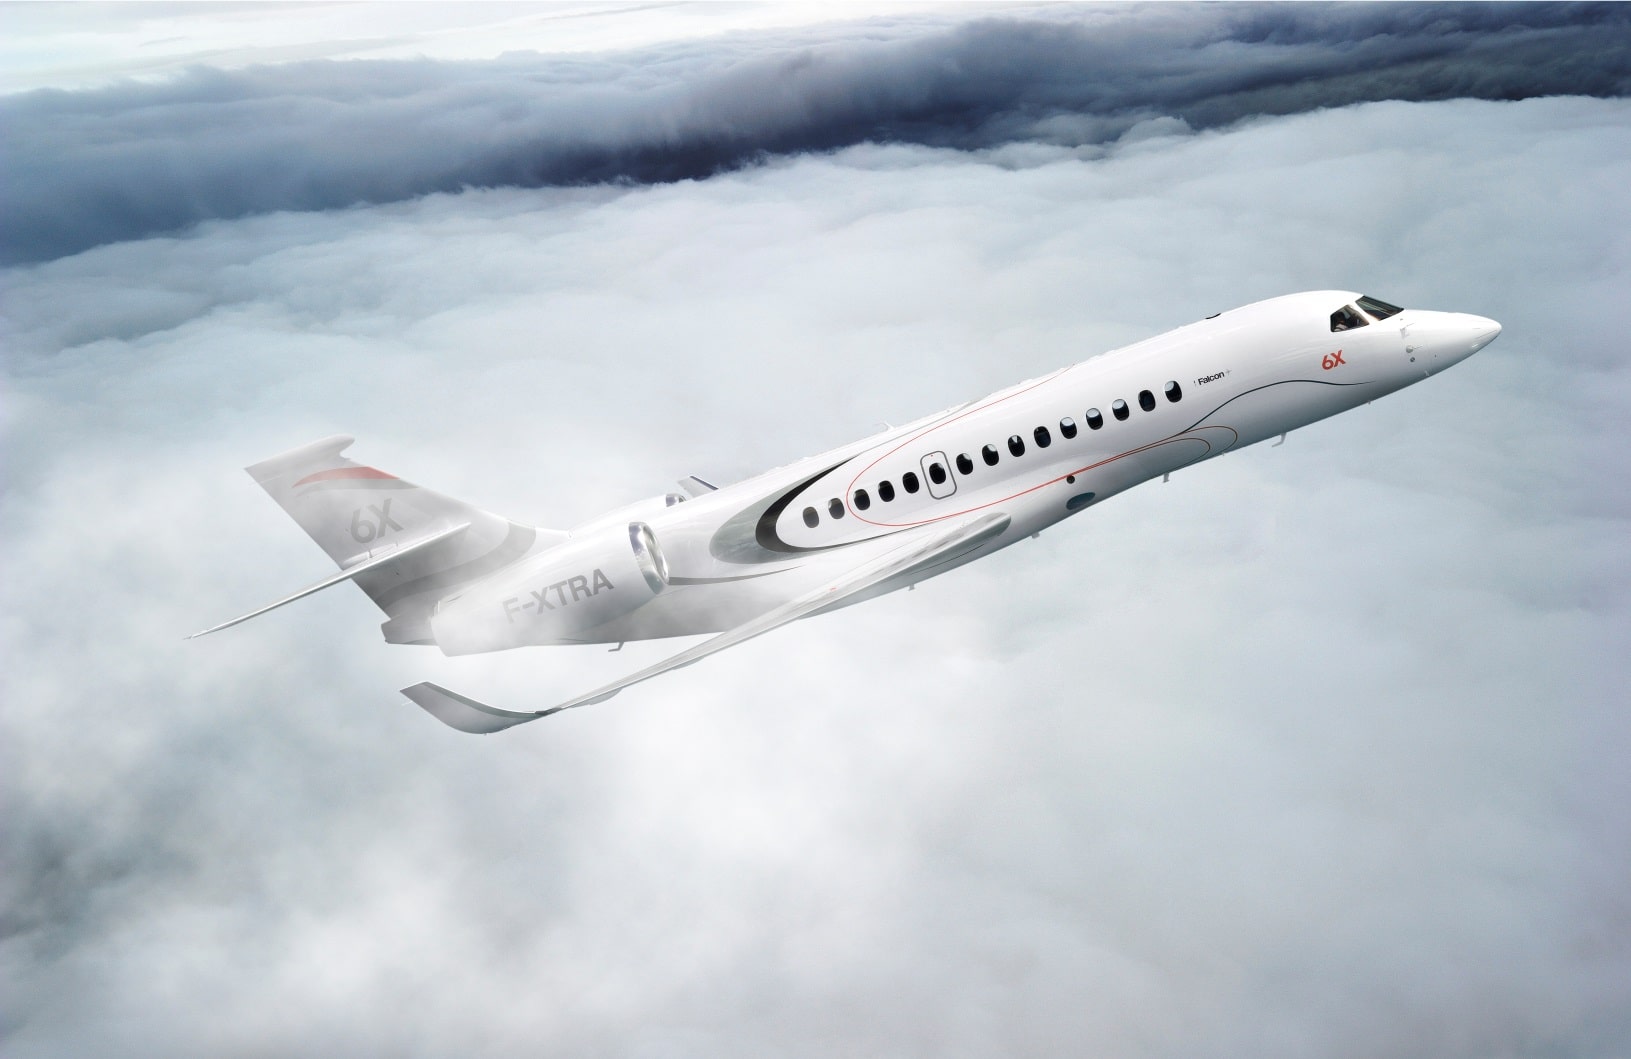 Dassault Falcon 6x flying in the sky